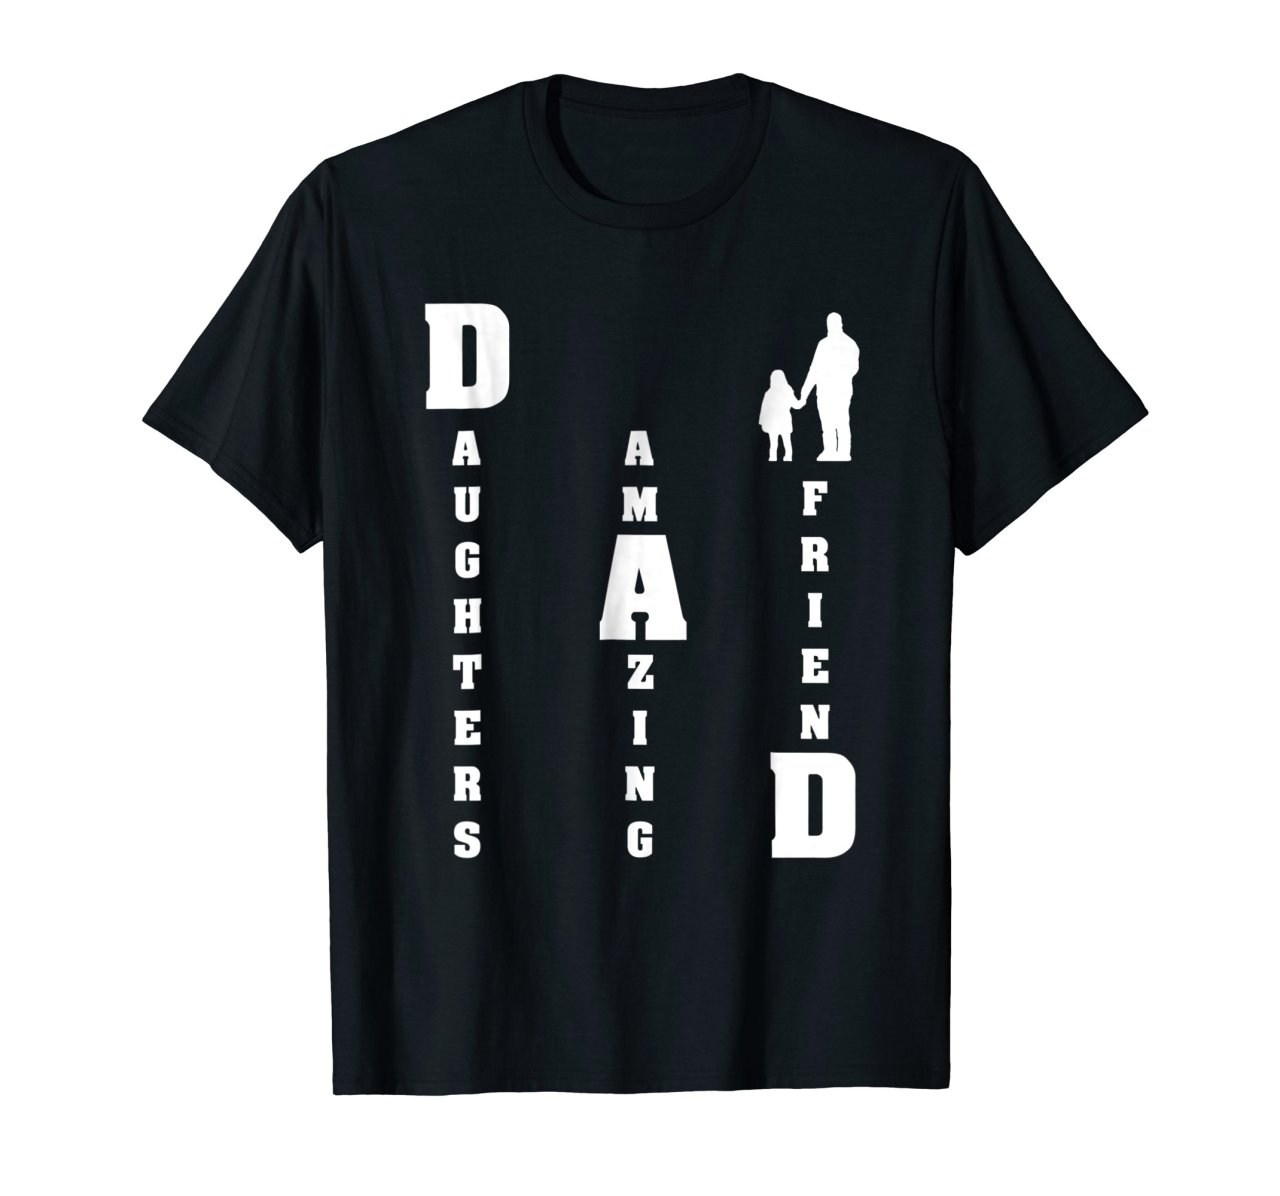 Fathers Day Gift From Daughter T-Shirt for Dad